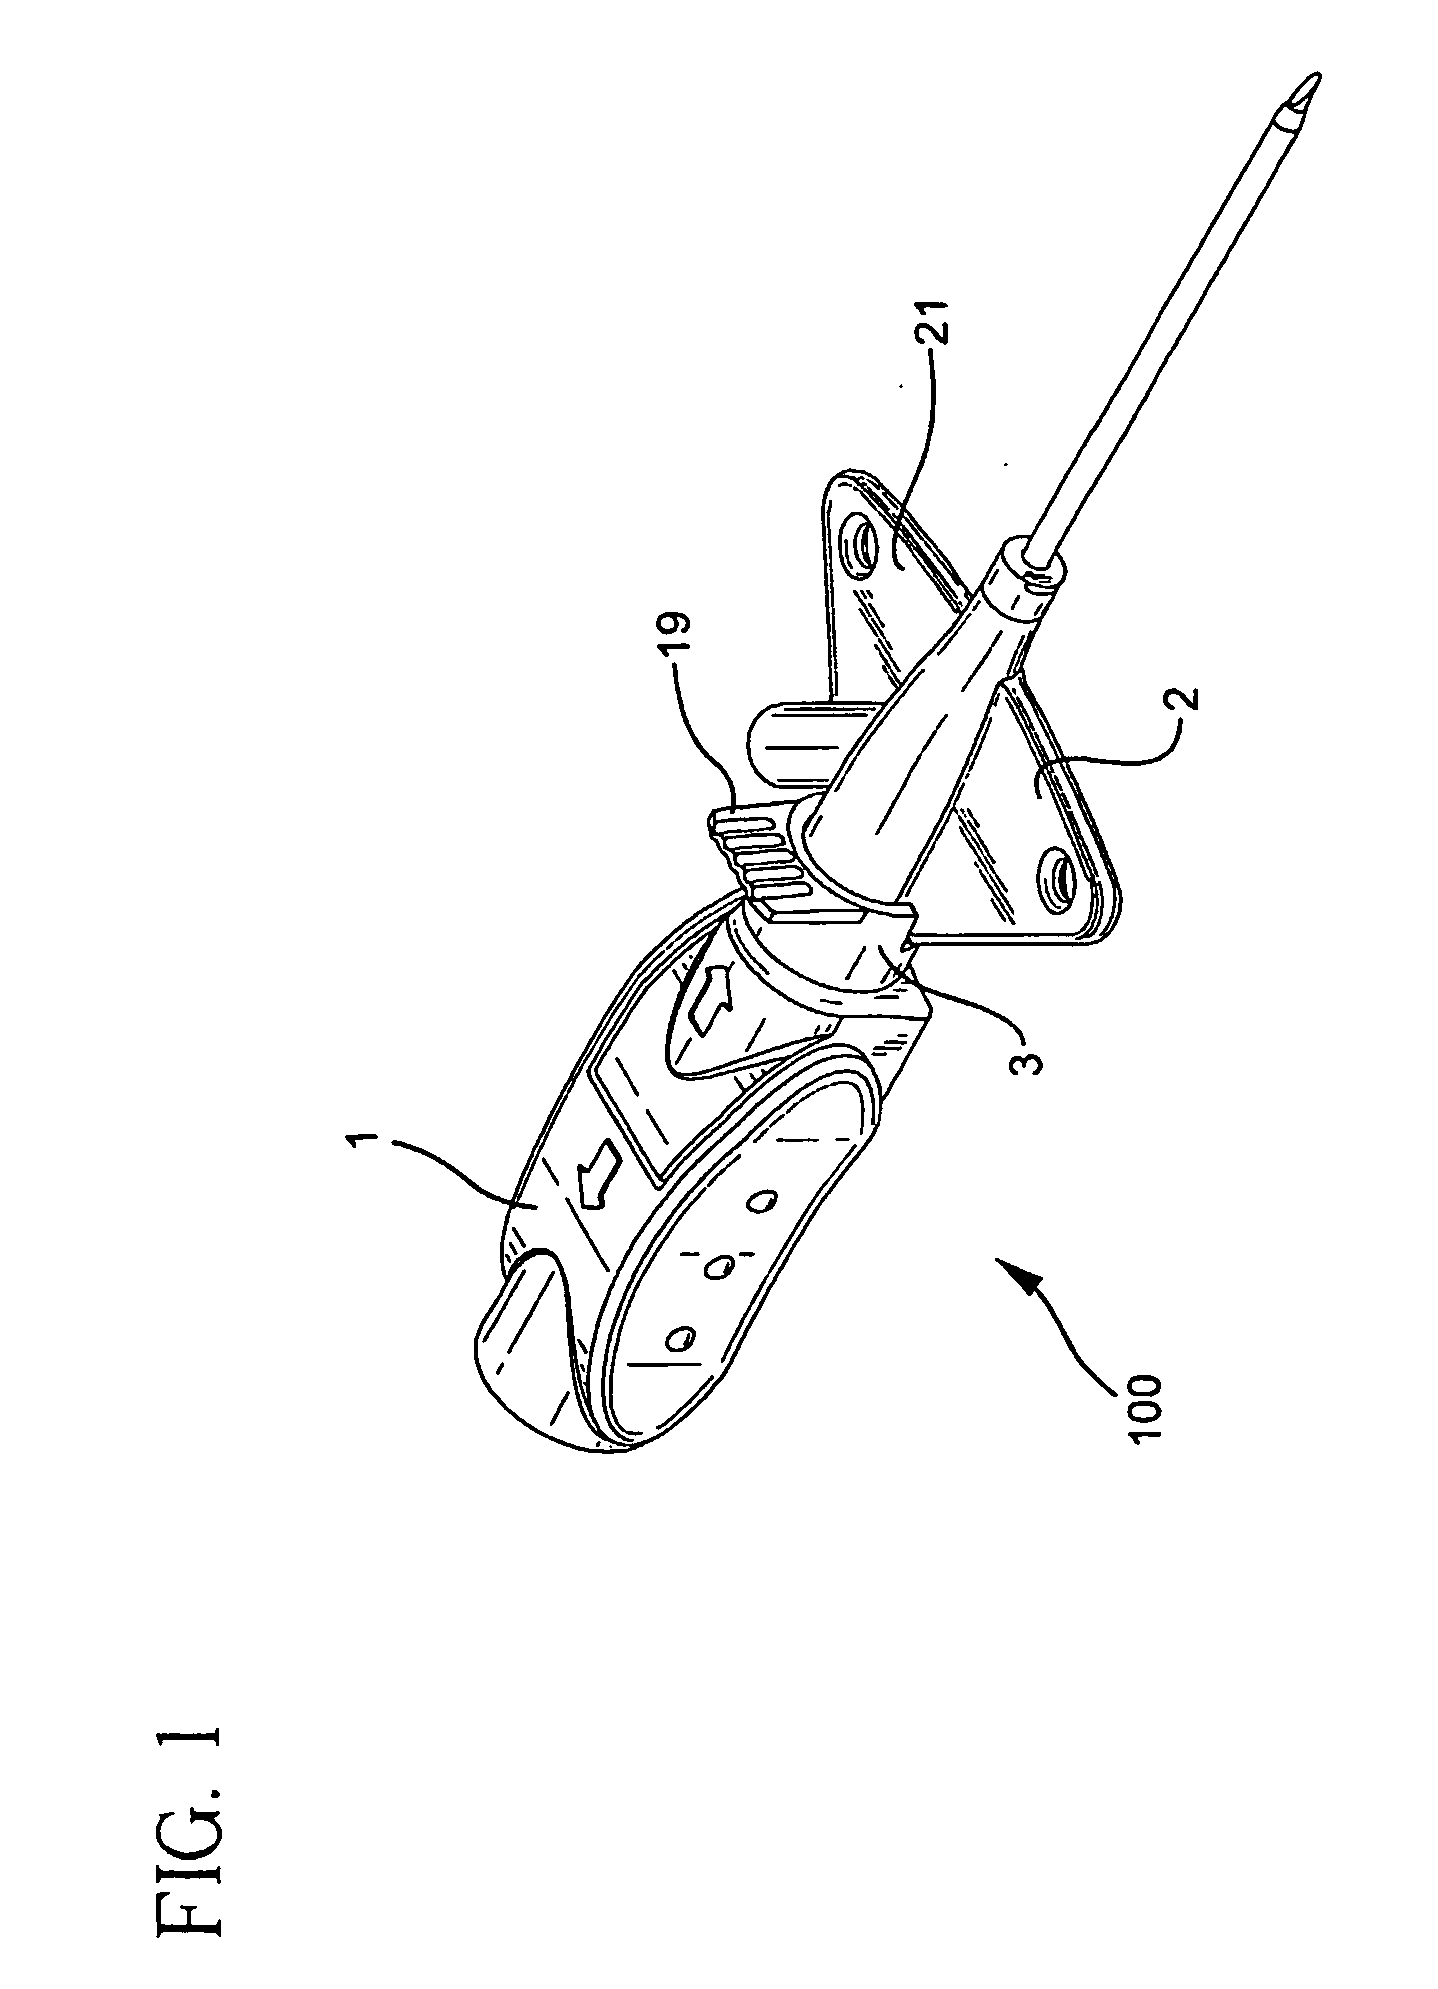 IV catheter and needle assembly and method